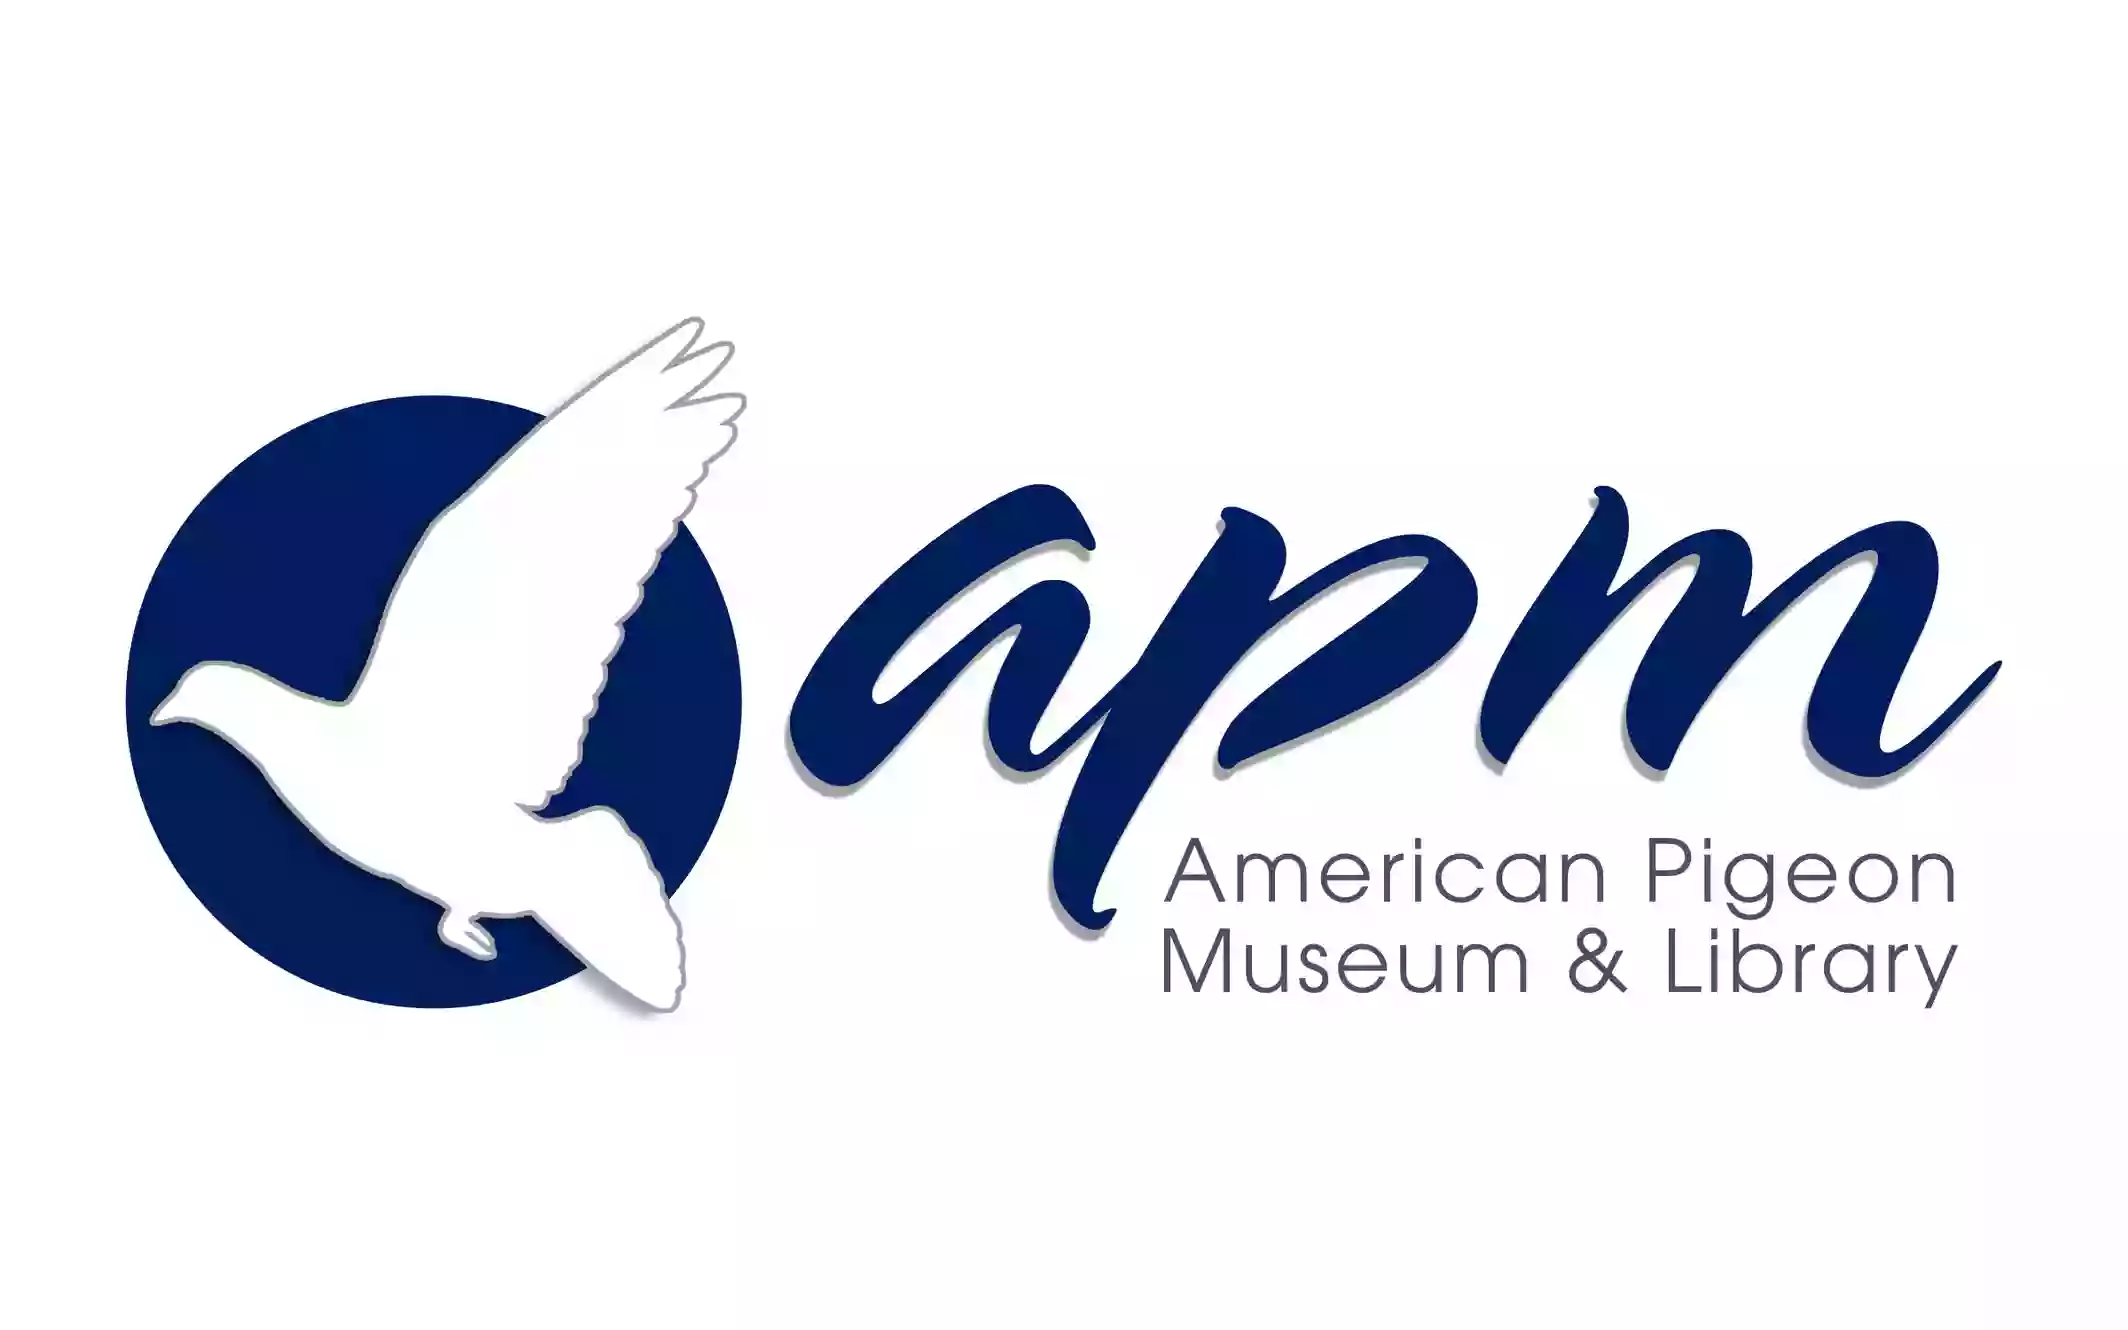 The American Pigeon Museum & Library